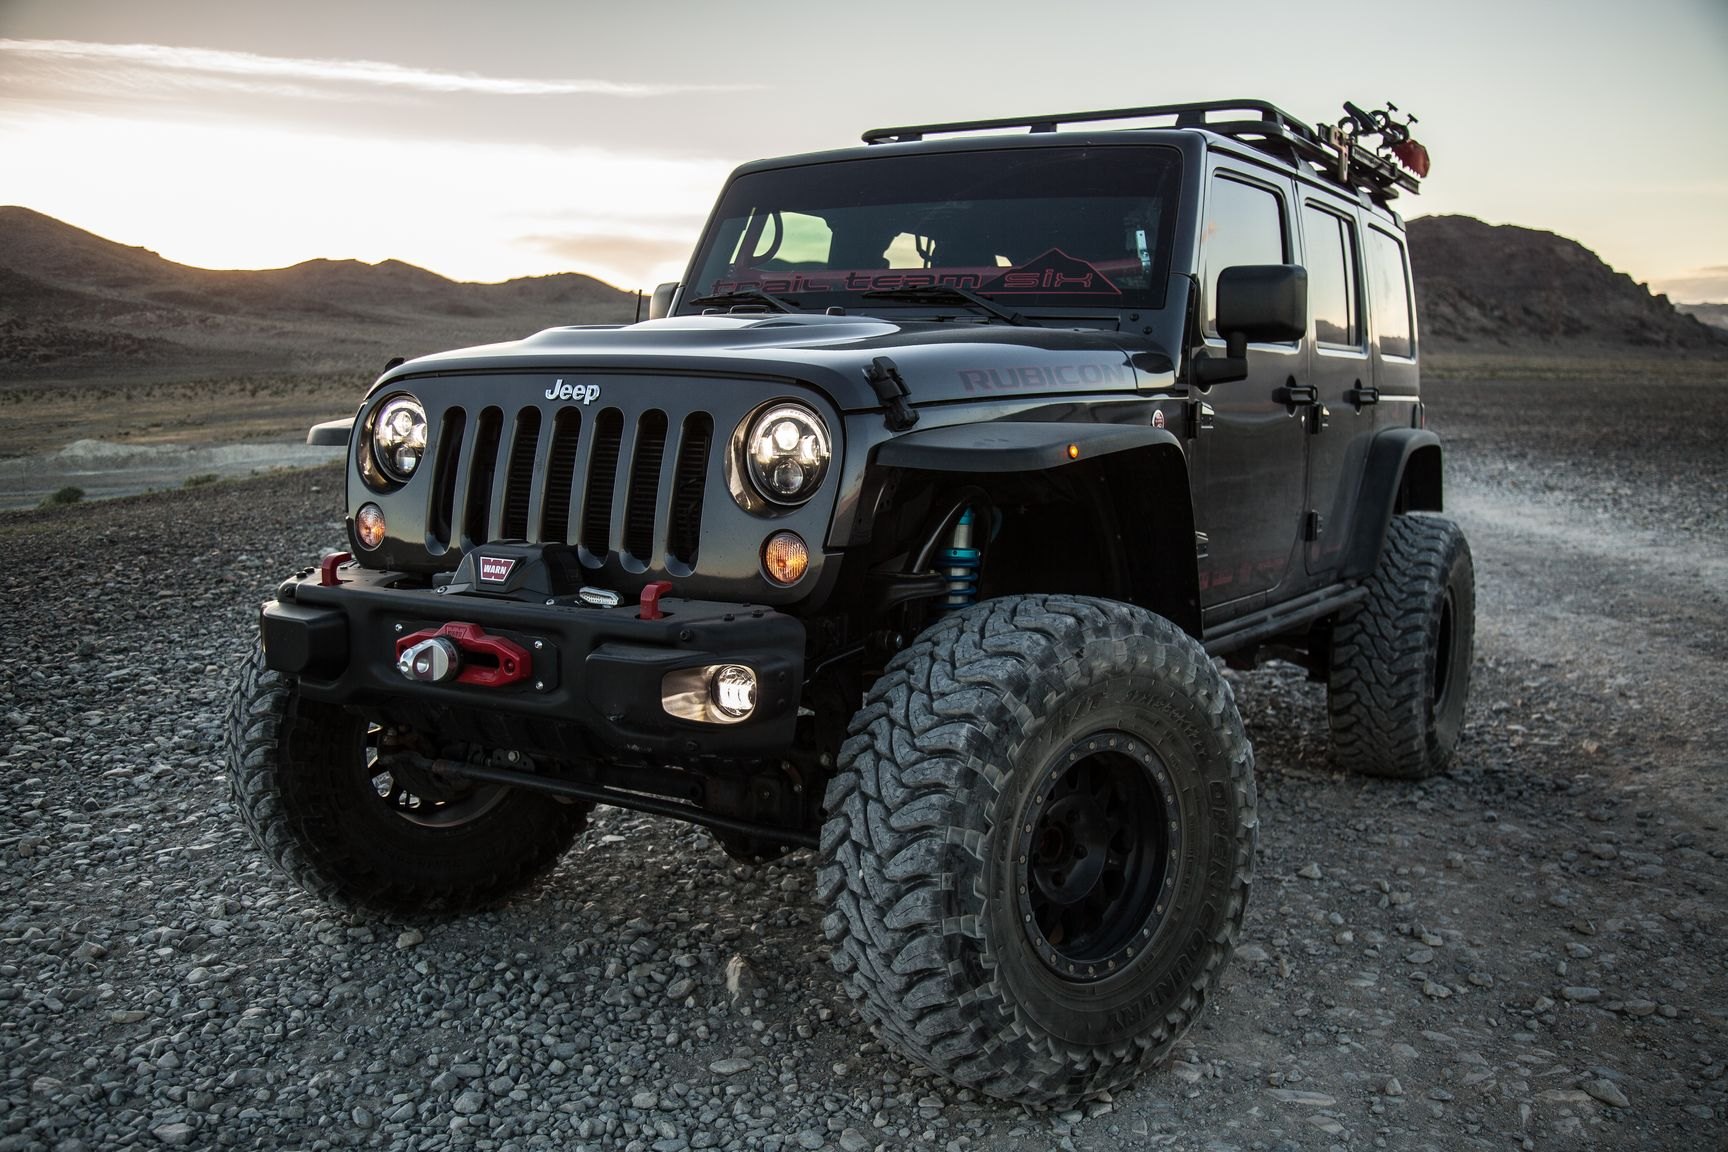 Black Lifted Jeep Wrangler Customized For Active Lifestyle Carrying